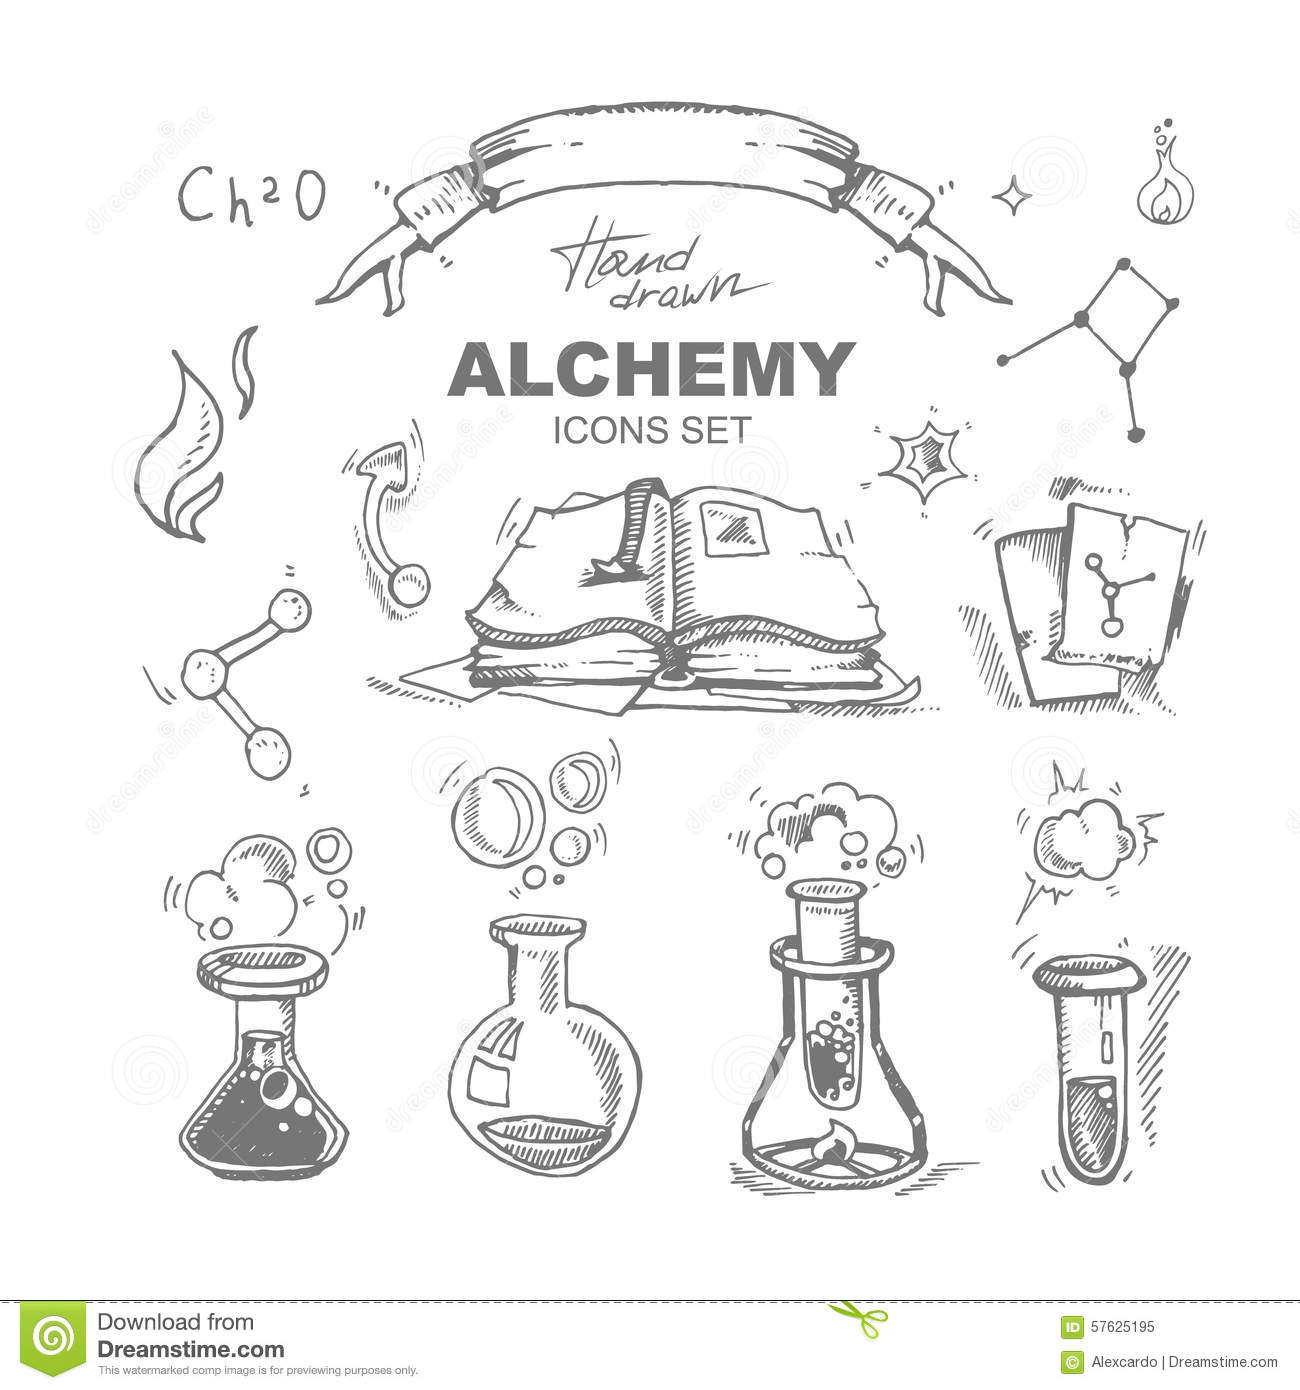 Alchemy clipart #6, Download drawings